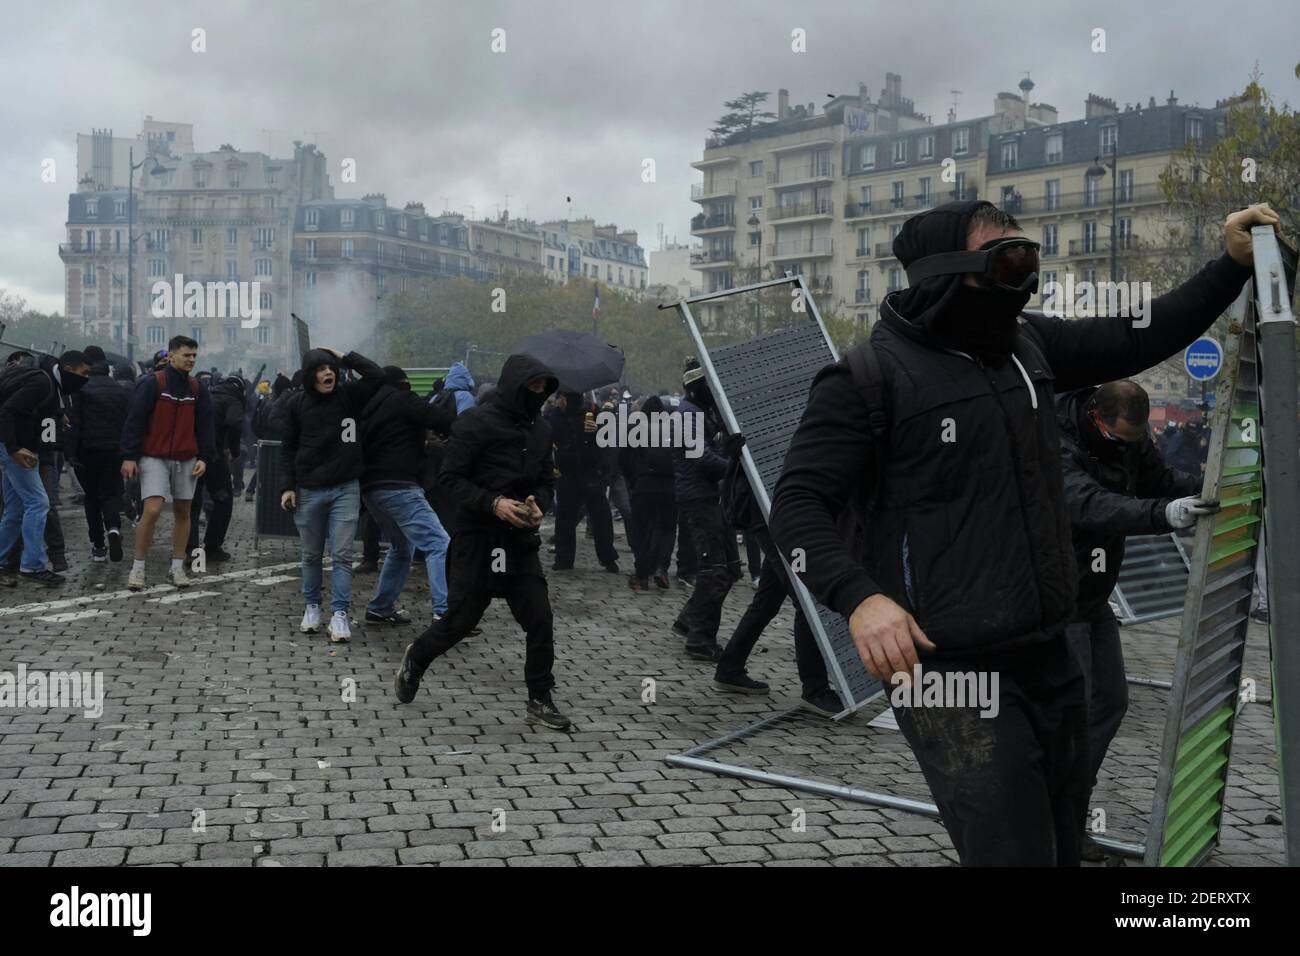 Gilets Jaunes or yellow vest and Black Bloc protestors clash with French  riot police during a demonstration marking the first anniversary of the  "yellow vest" (gilets jaunes) movement. French "yellow vest" protesters